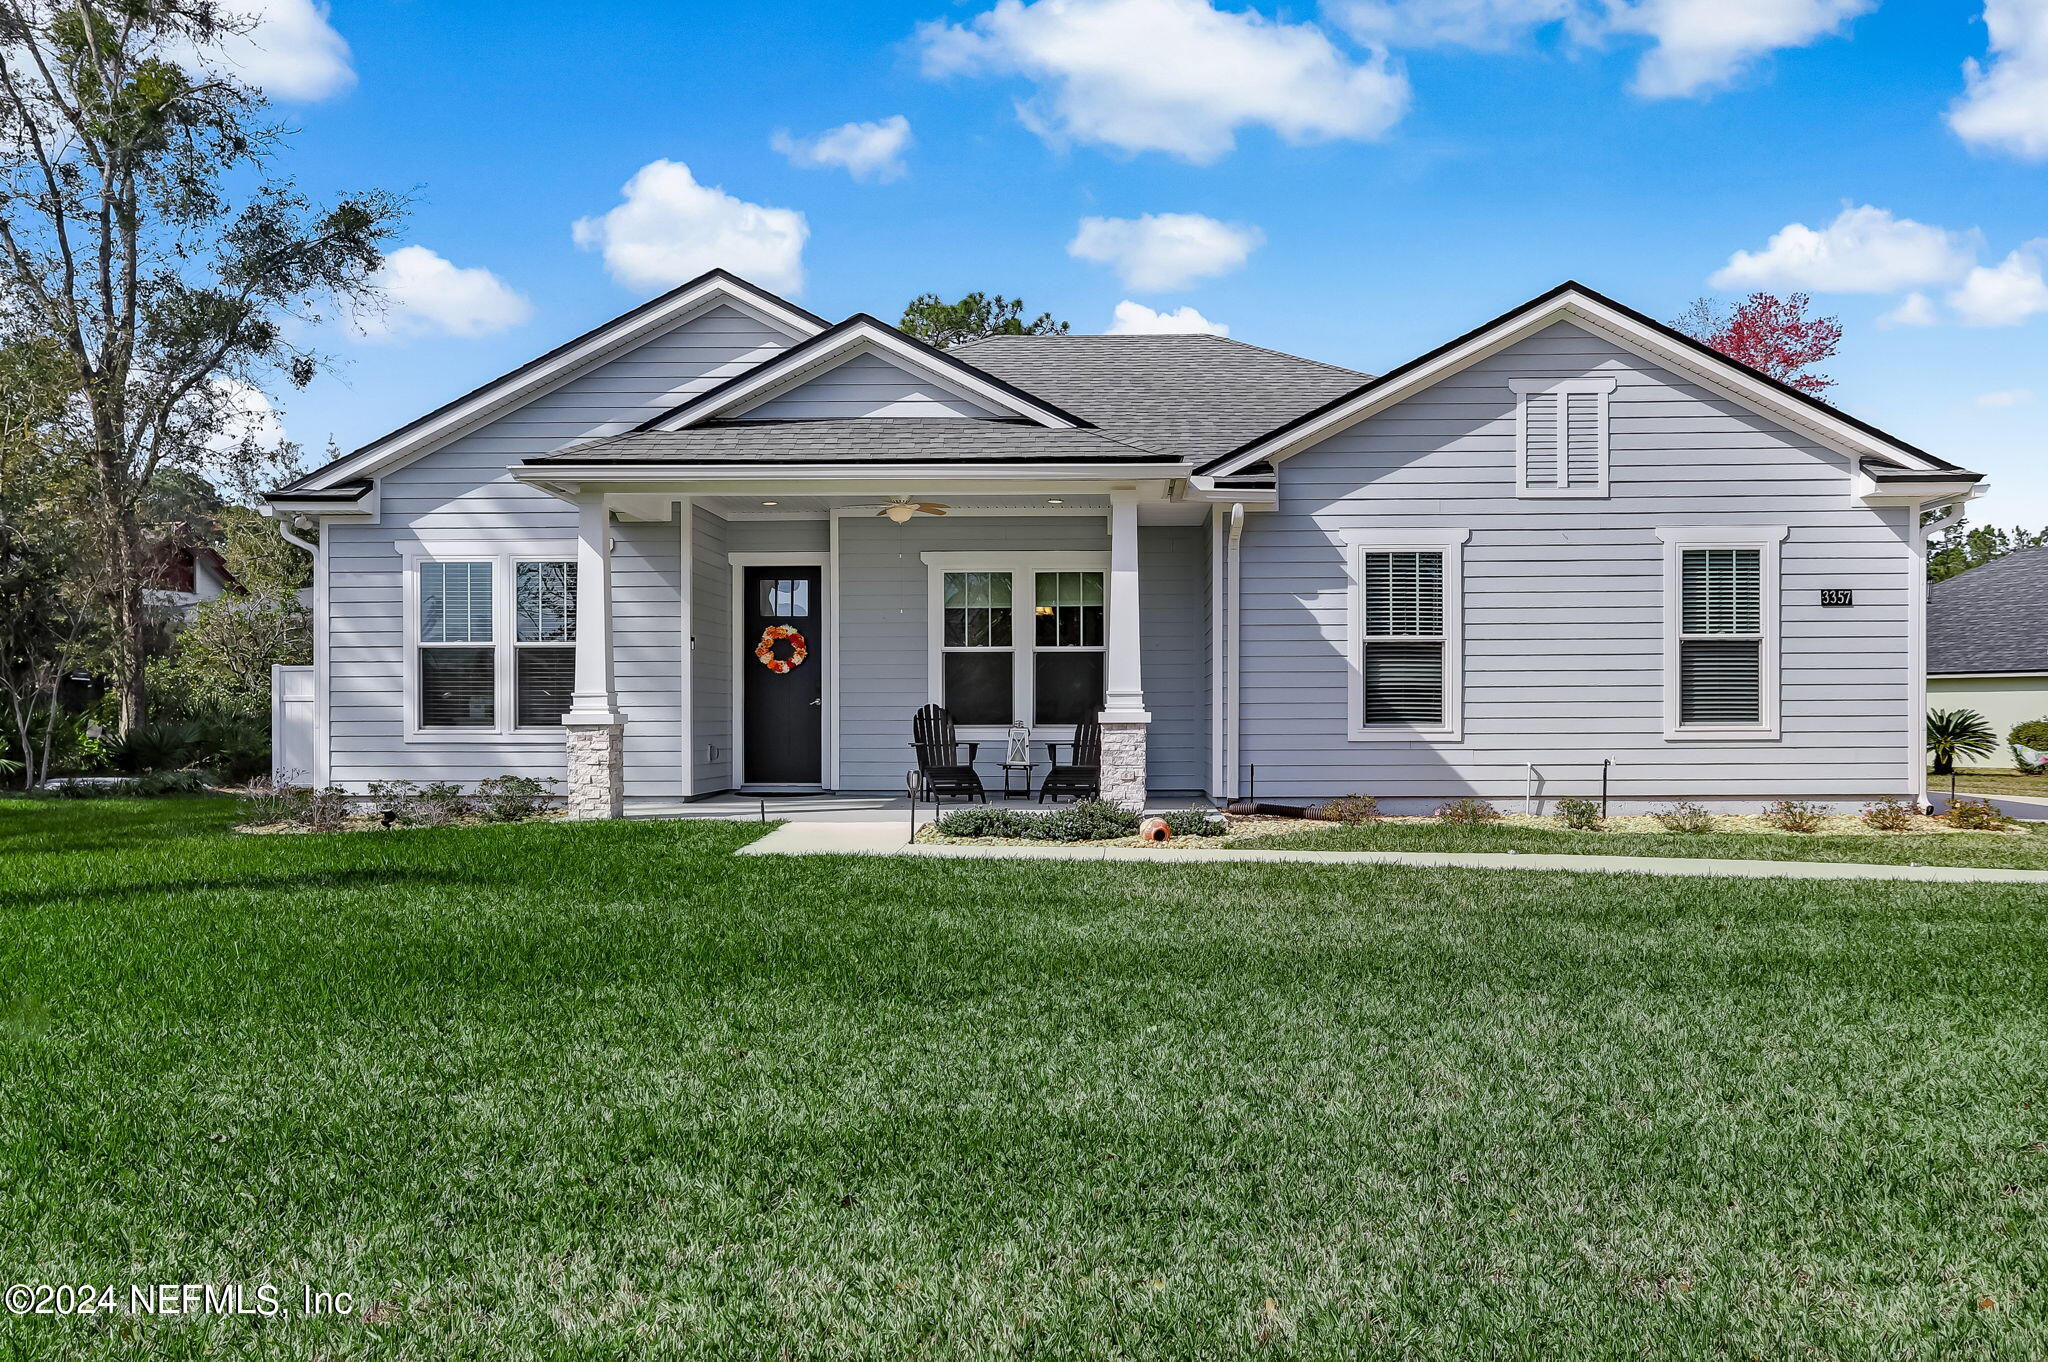 Green Cove Springs, FL home for sale located at 3357 OLYMPIC Drive, Green Cove Springs, FL 32043